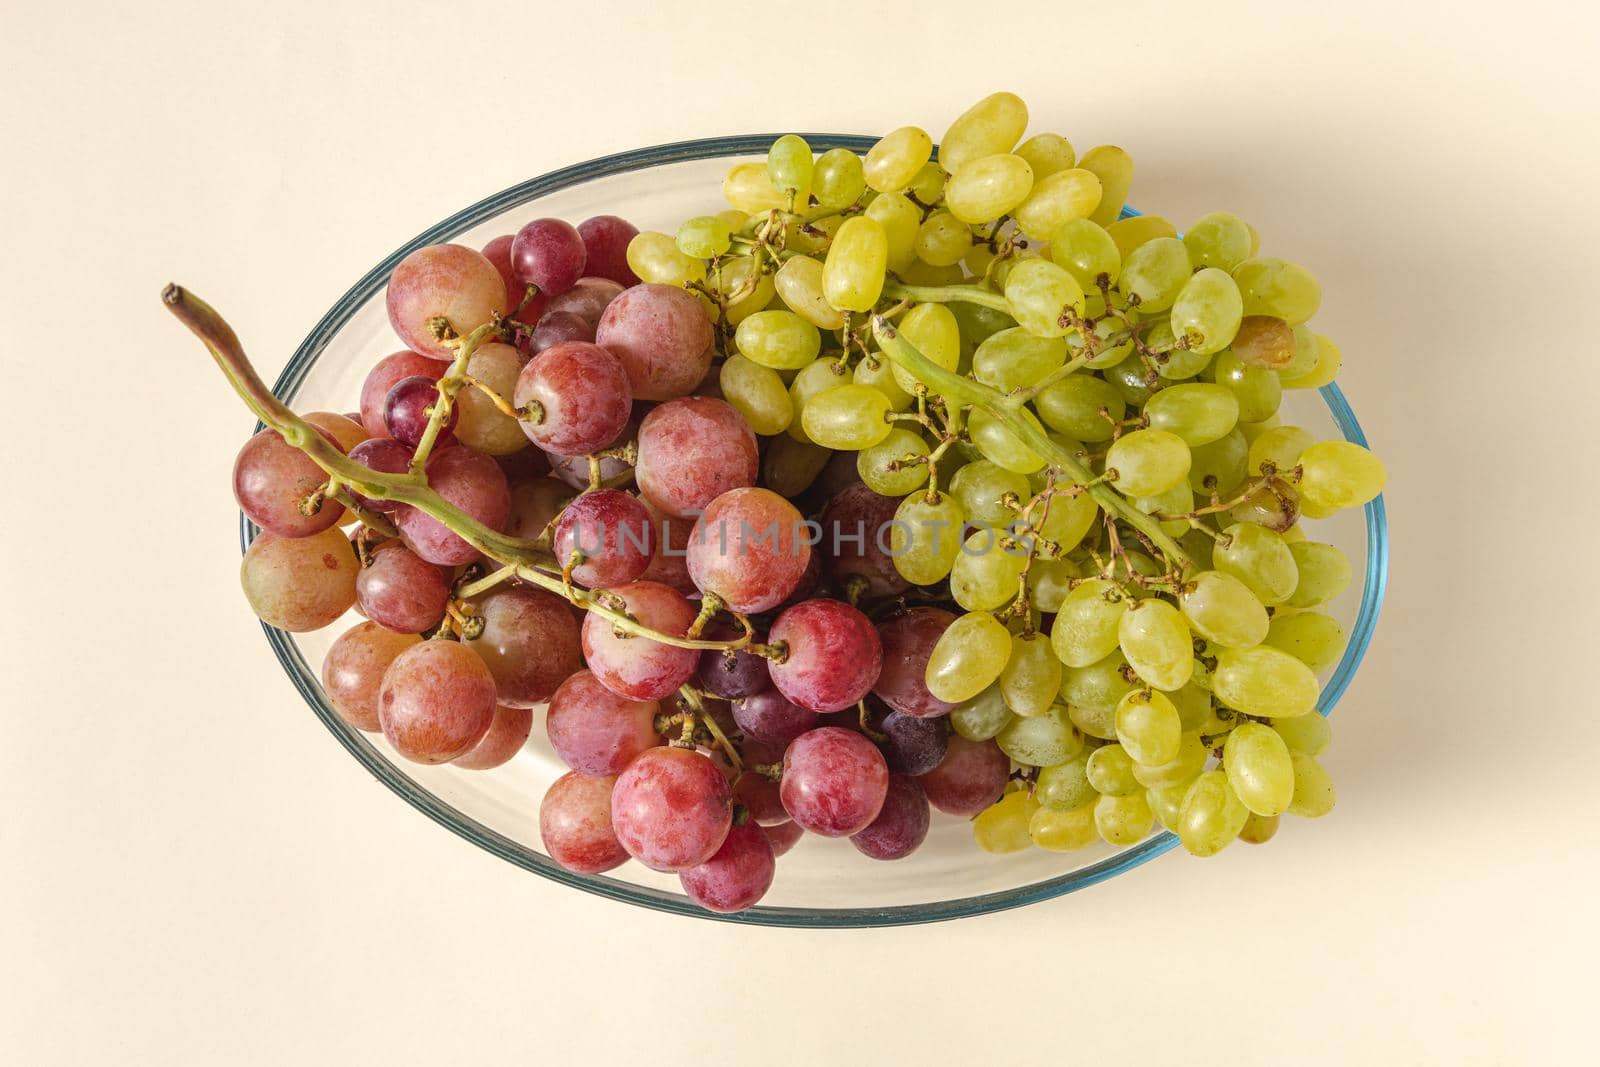 Fresh red and green grapes in a glass bowl. Healthy eating concept by Sonat